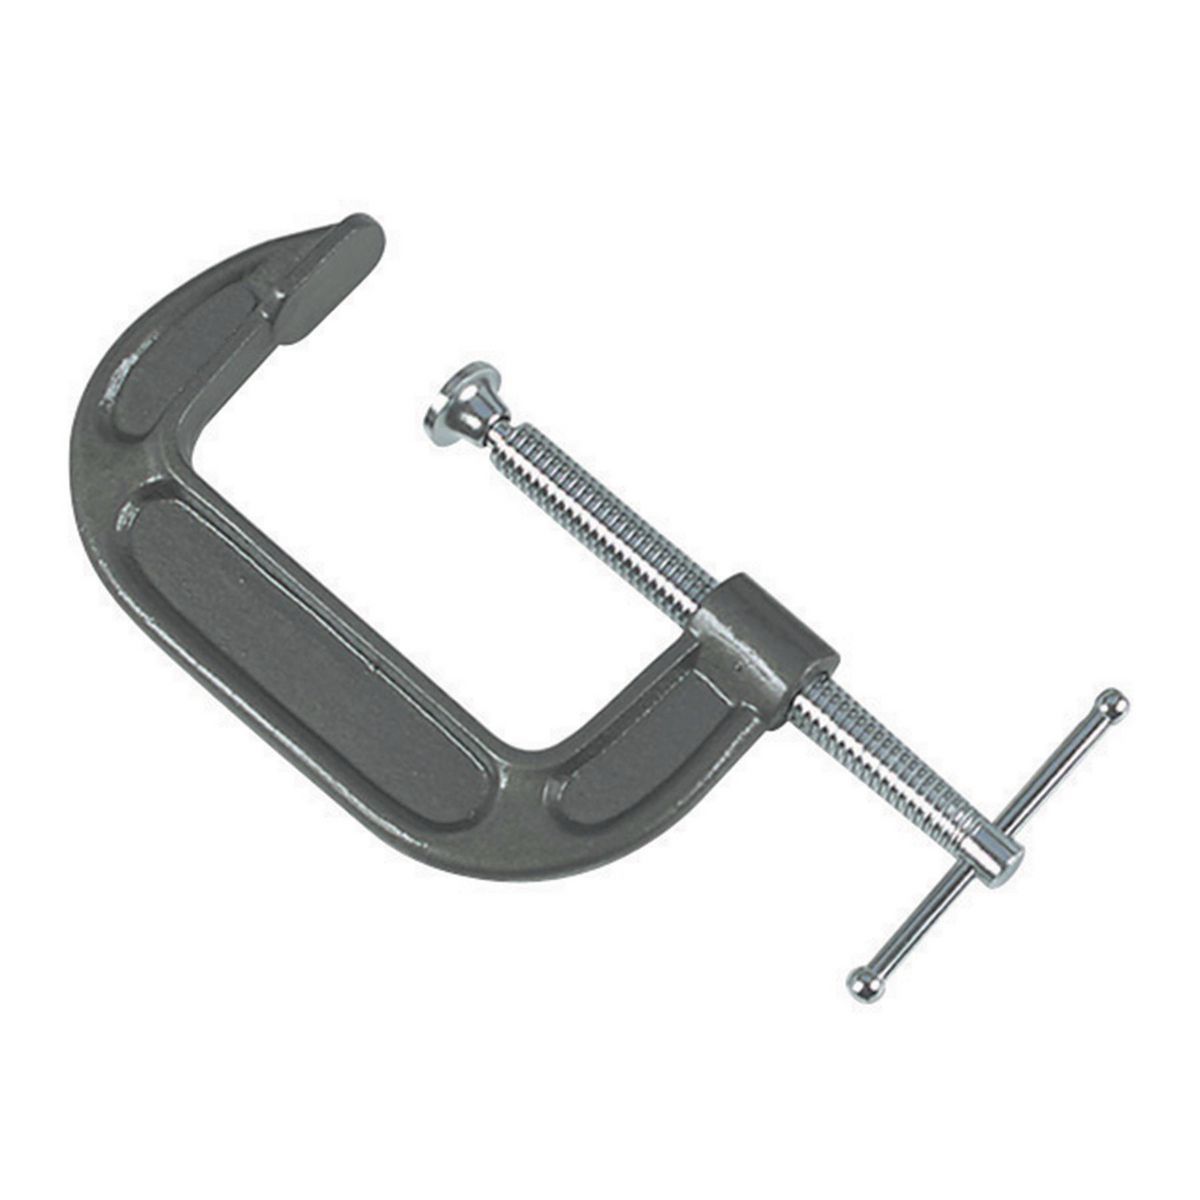 PITTSBURGH 6" Industrial C-Clamp